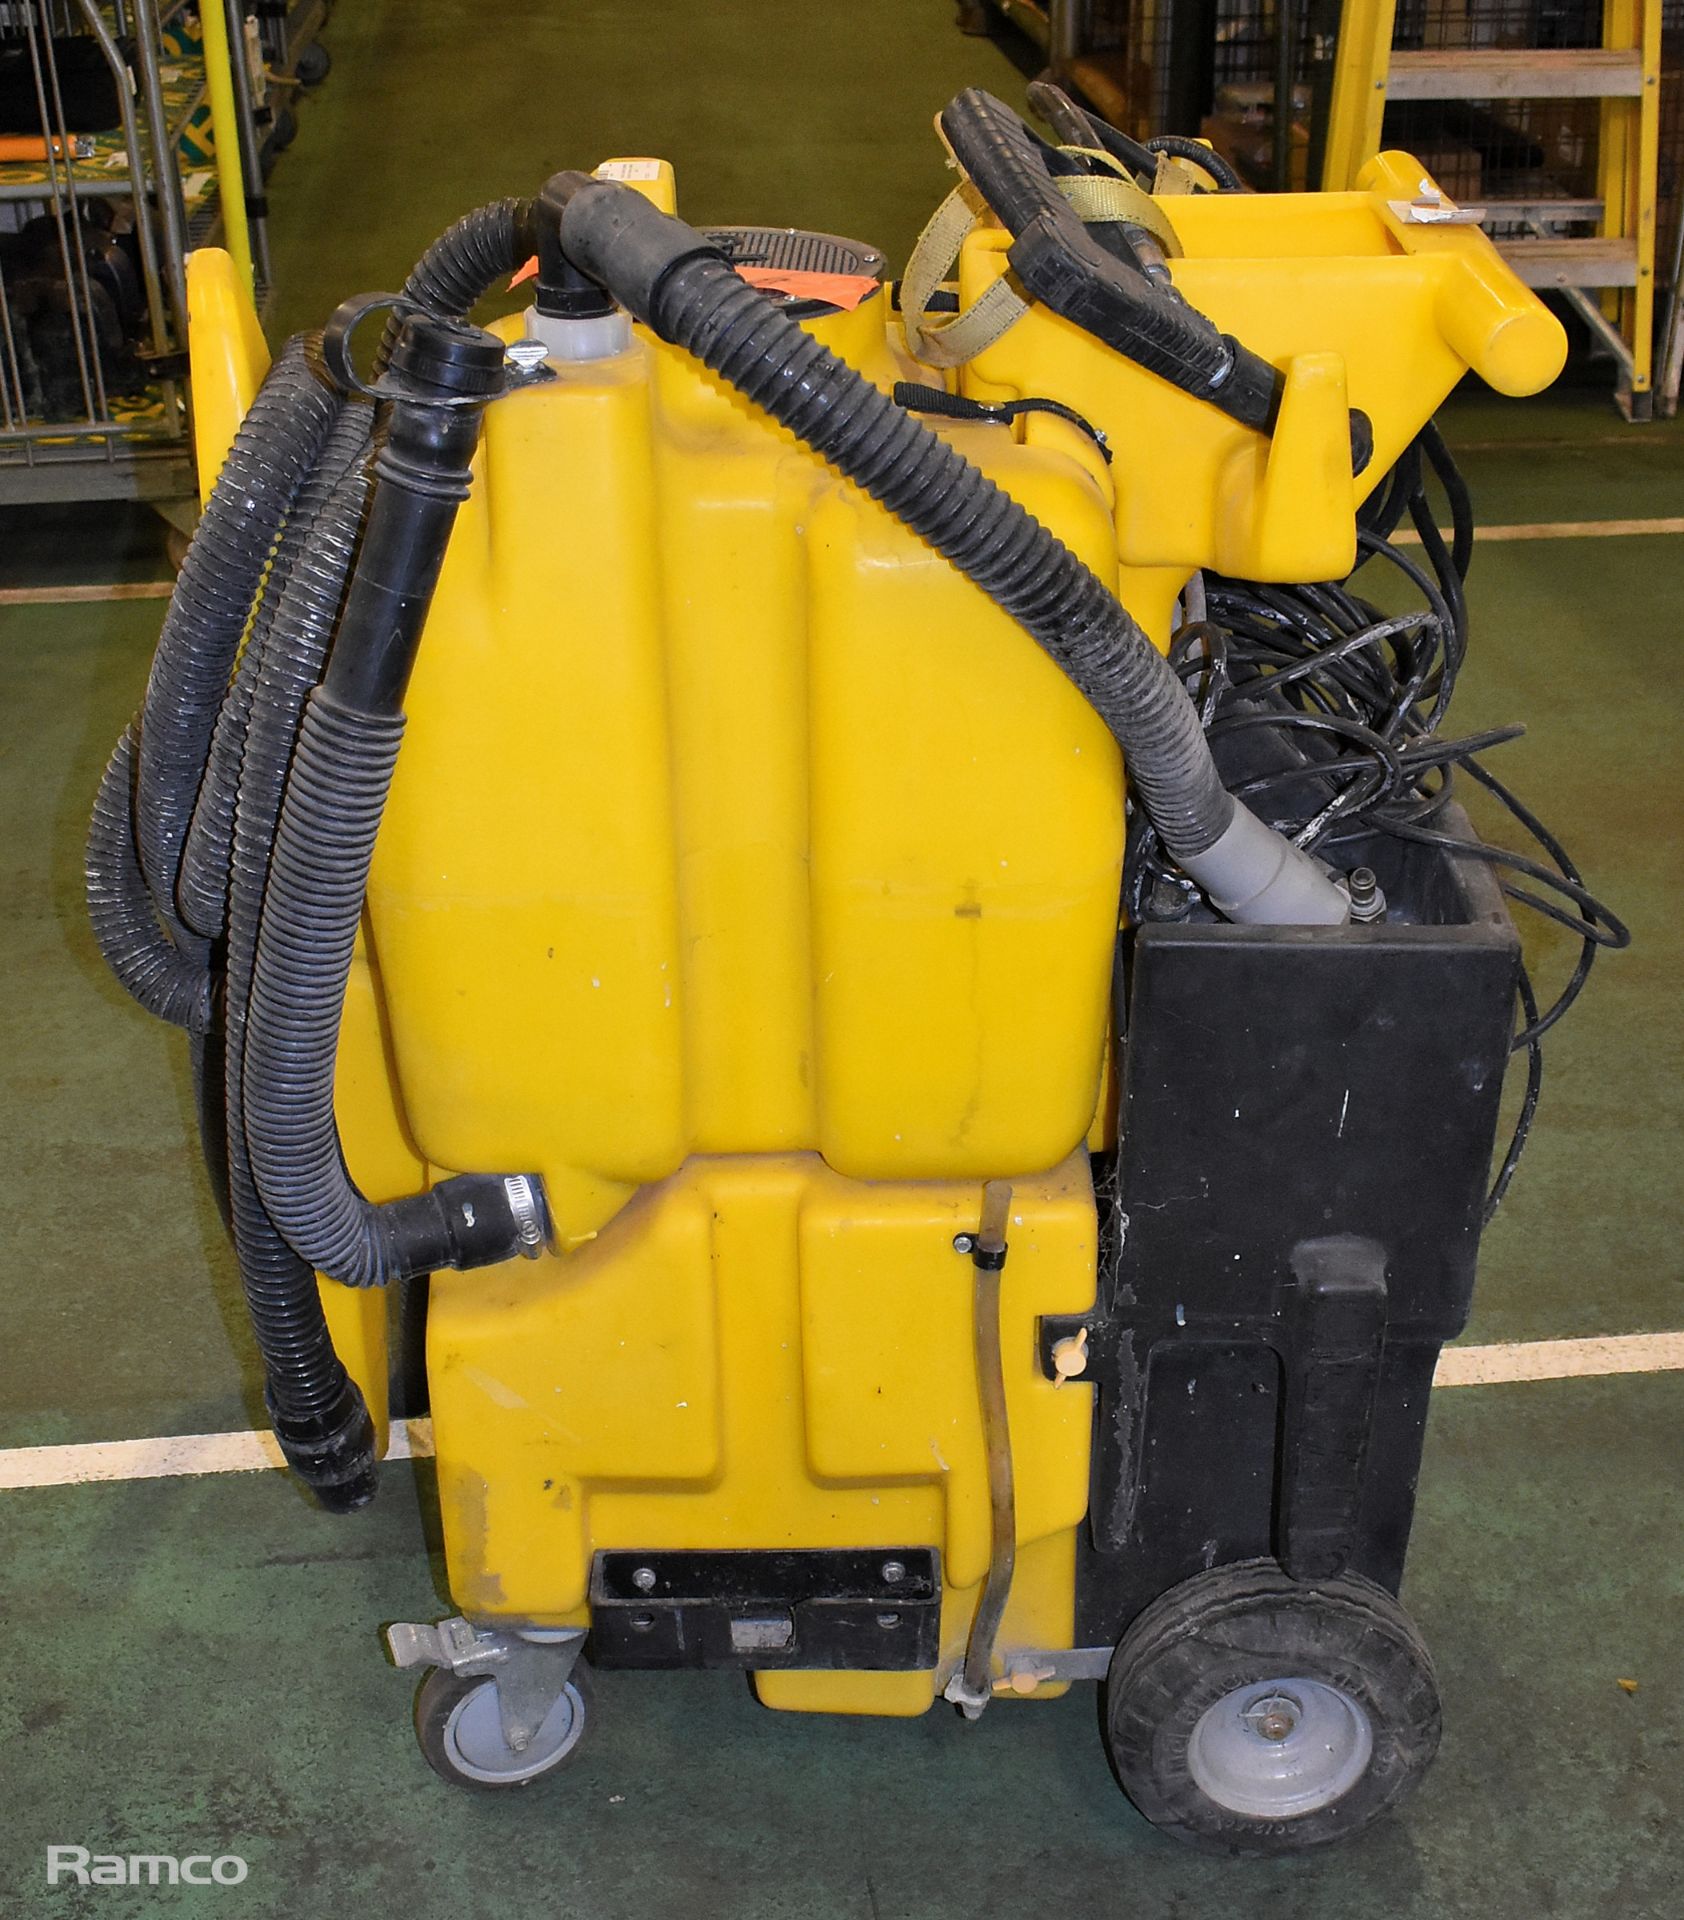 Kaivac Cleaning Systems industrial pressure washer - 240V - Image 3 of 7